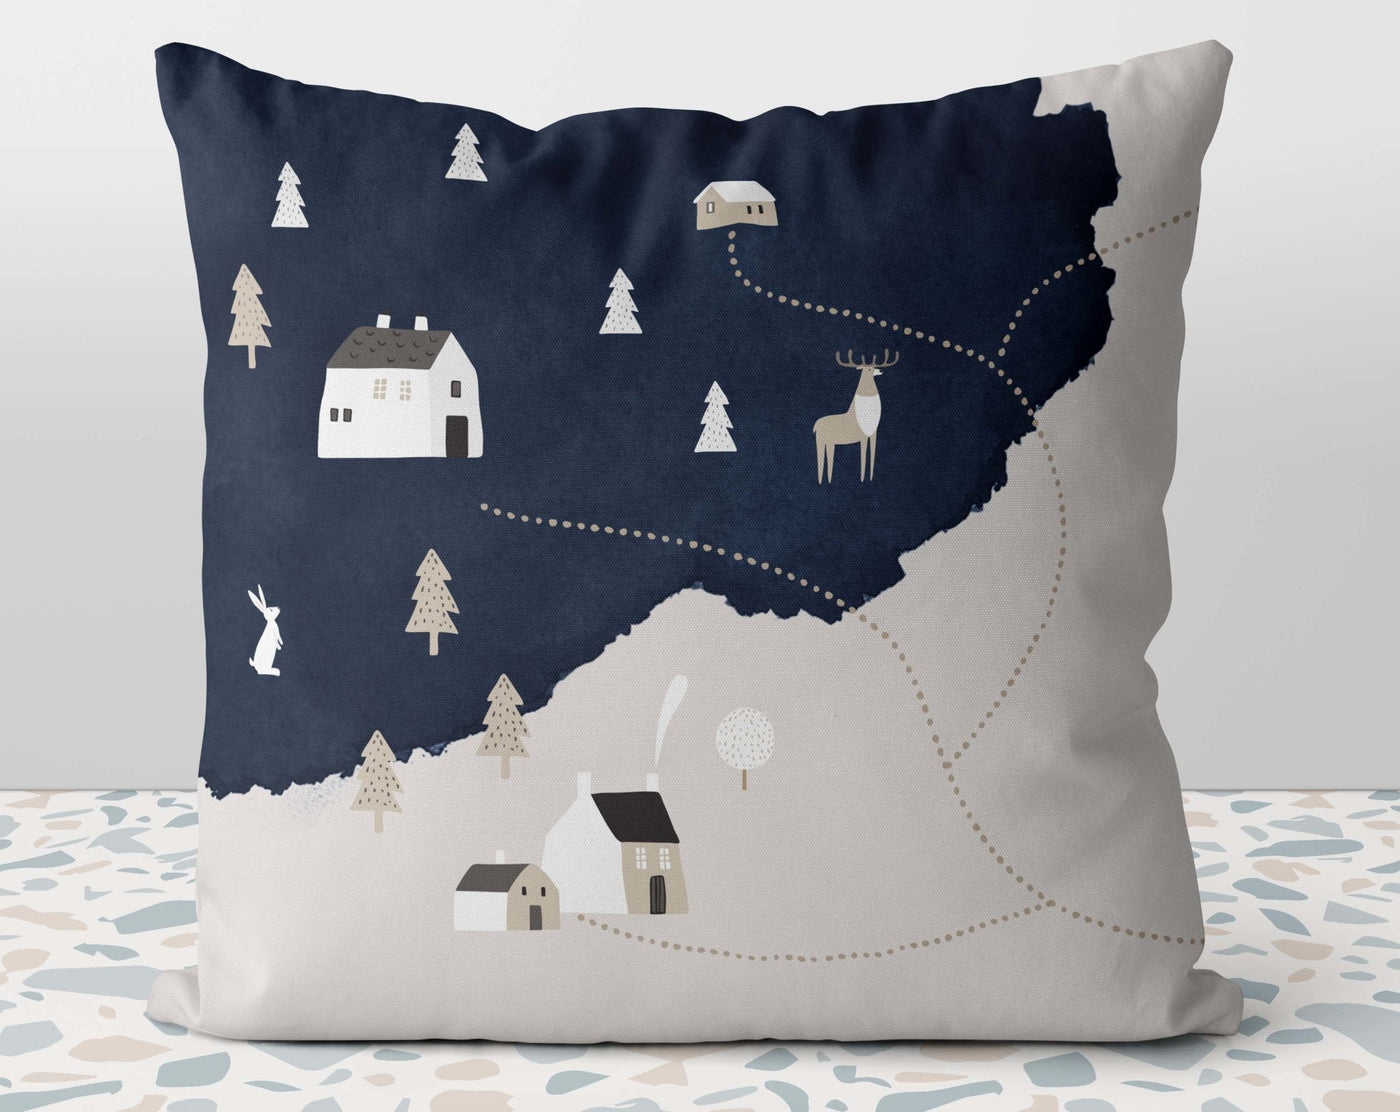 Christmas Town Village Starry Night Season Greetings Blue Beige Square Pillow with Cover Throw with Insert - Cush Potato Pillows